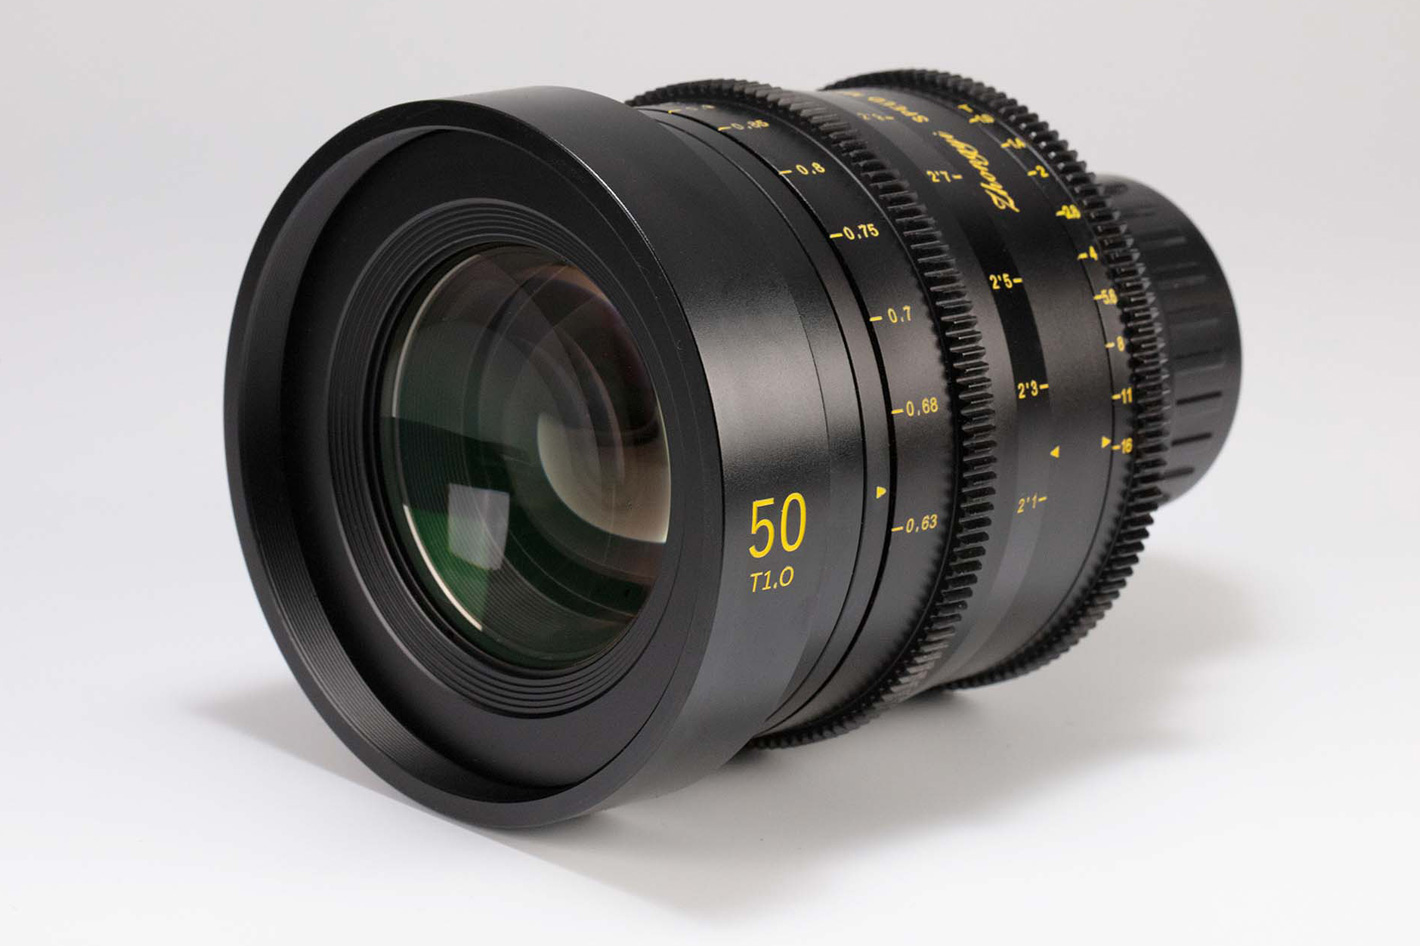 ZY Optics redesigns the world’s first 50T1 Cine lens for PL mount